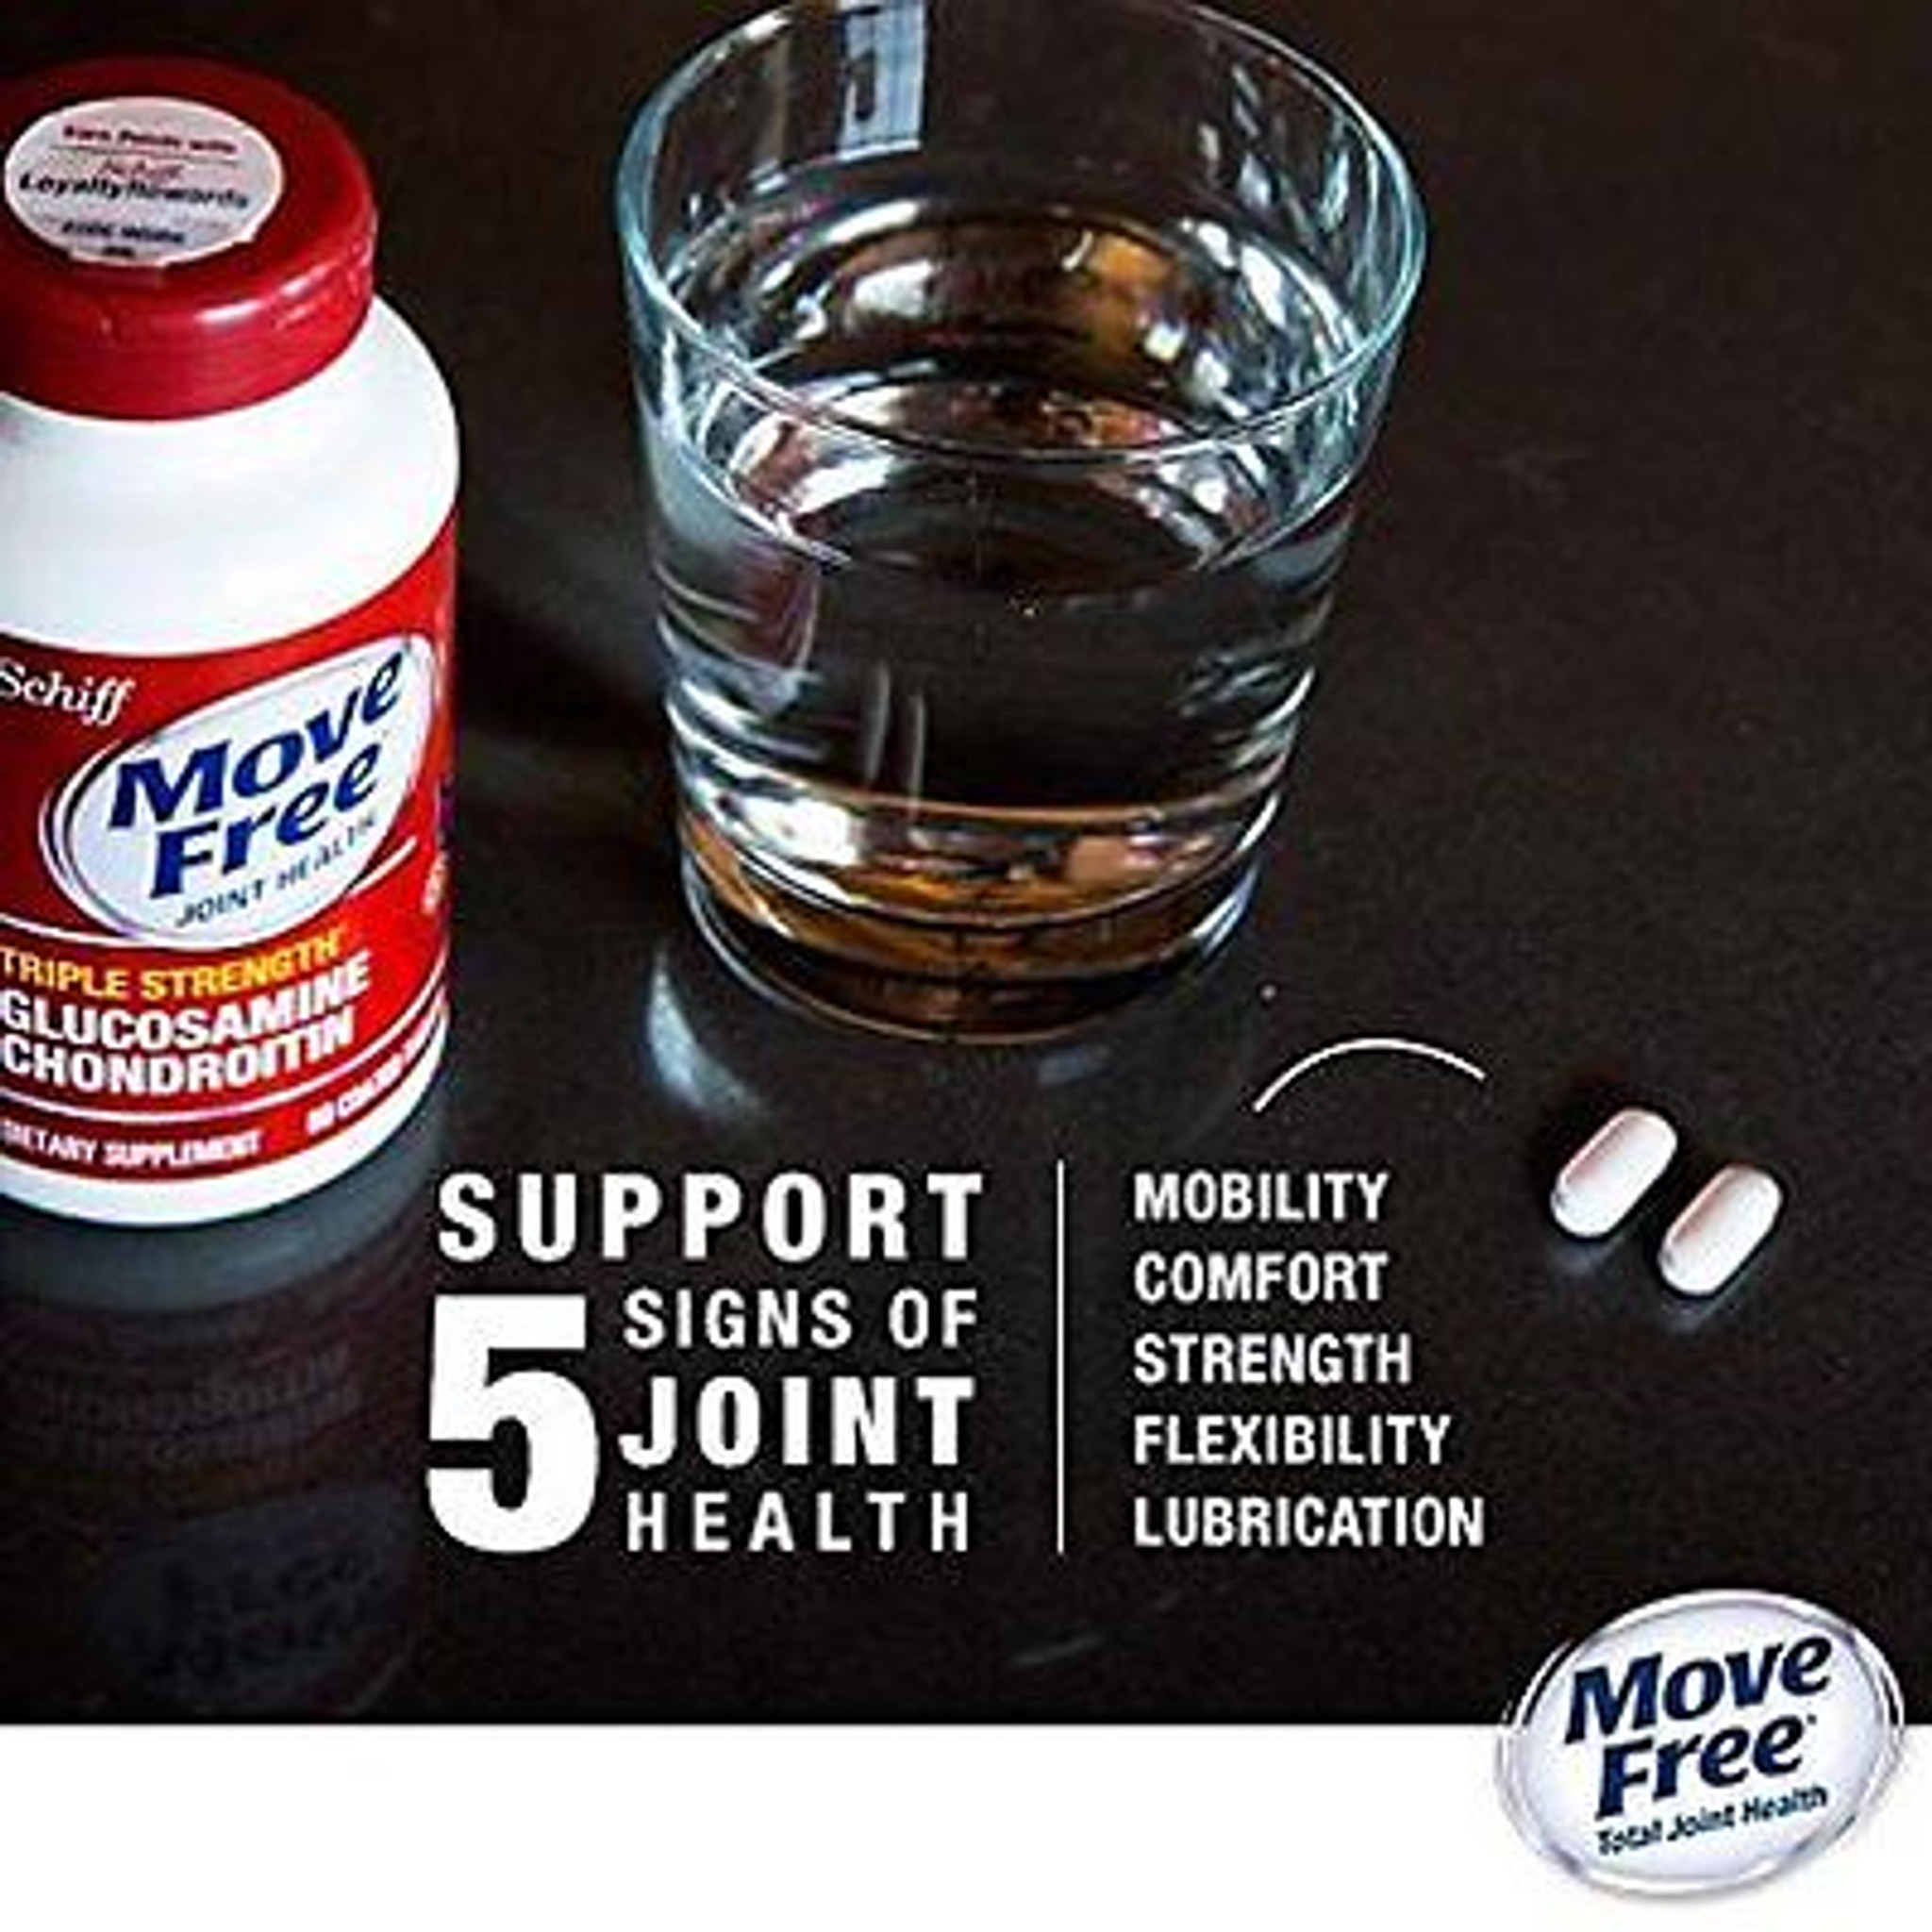 Move Free Glucosamine Chondroitin MSM & Vitamin D3 - Joint Health (80  Tablets) by Schiff Products at the Vitamin Shoppe